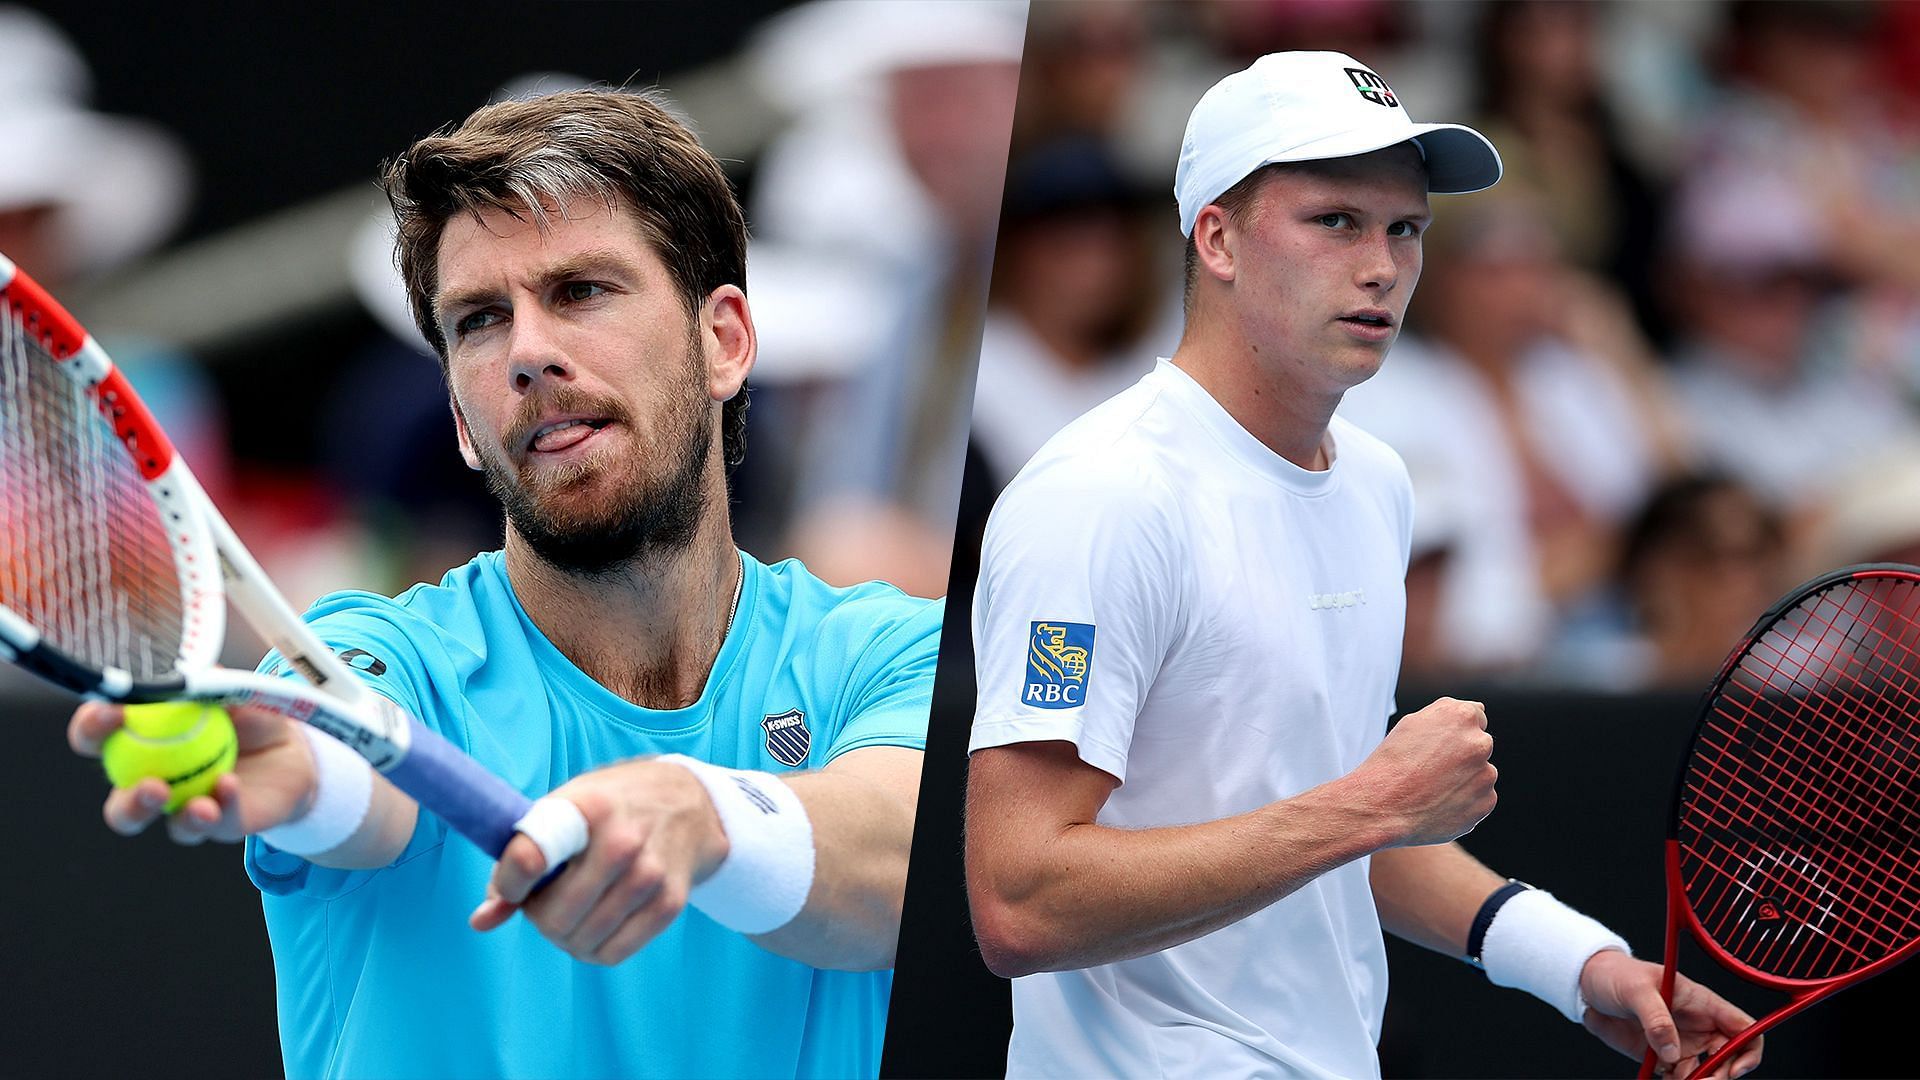 Cameron Norrie will face Jenson Brooksby in the semifinals of the ASB Classic